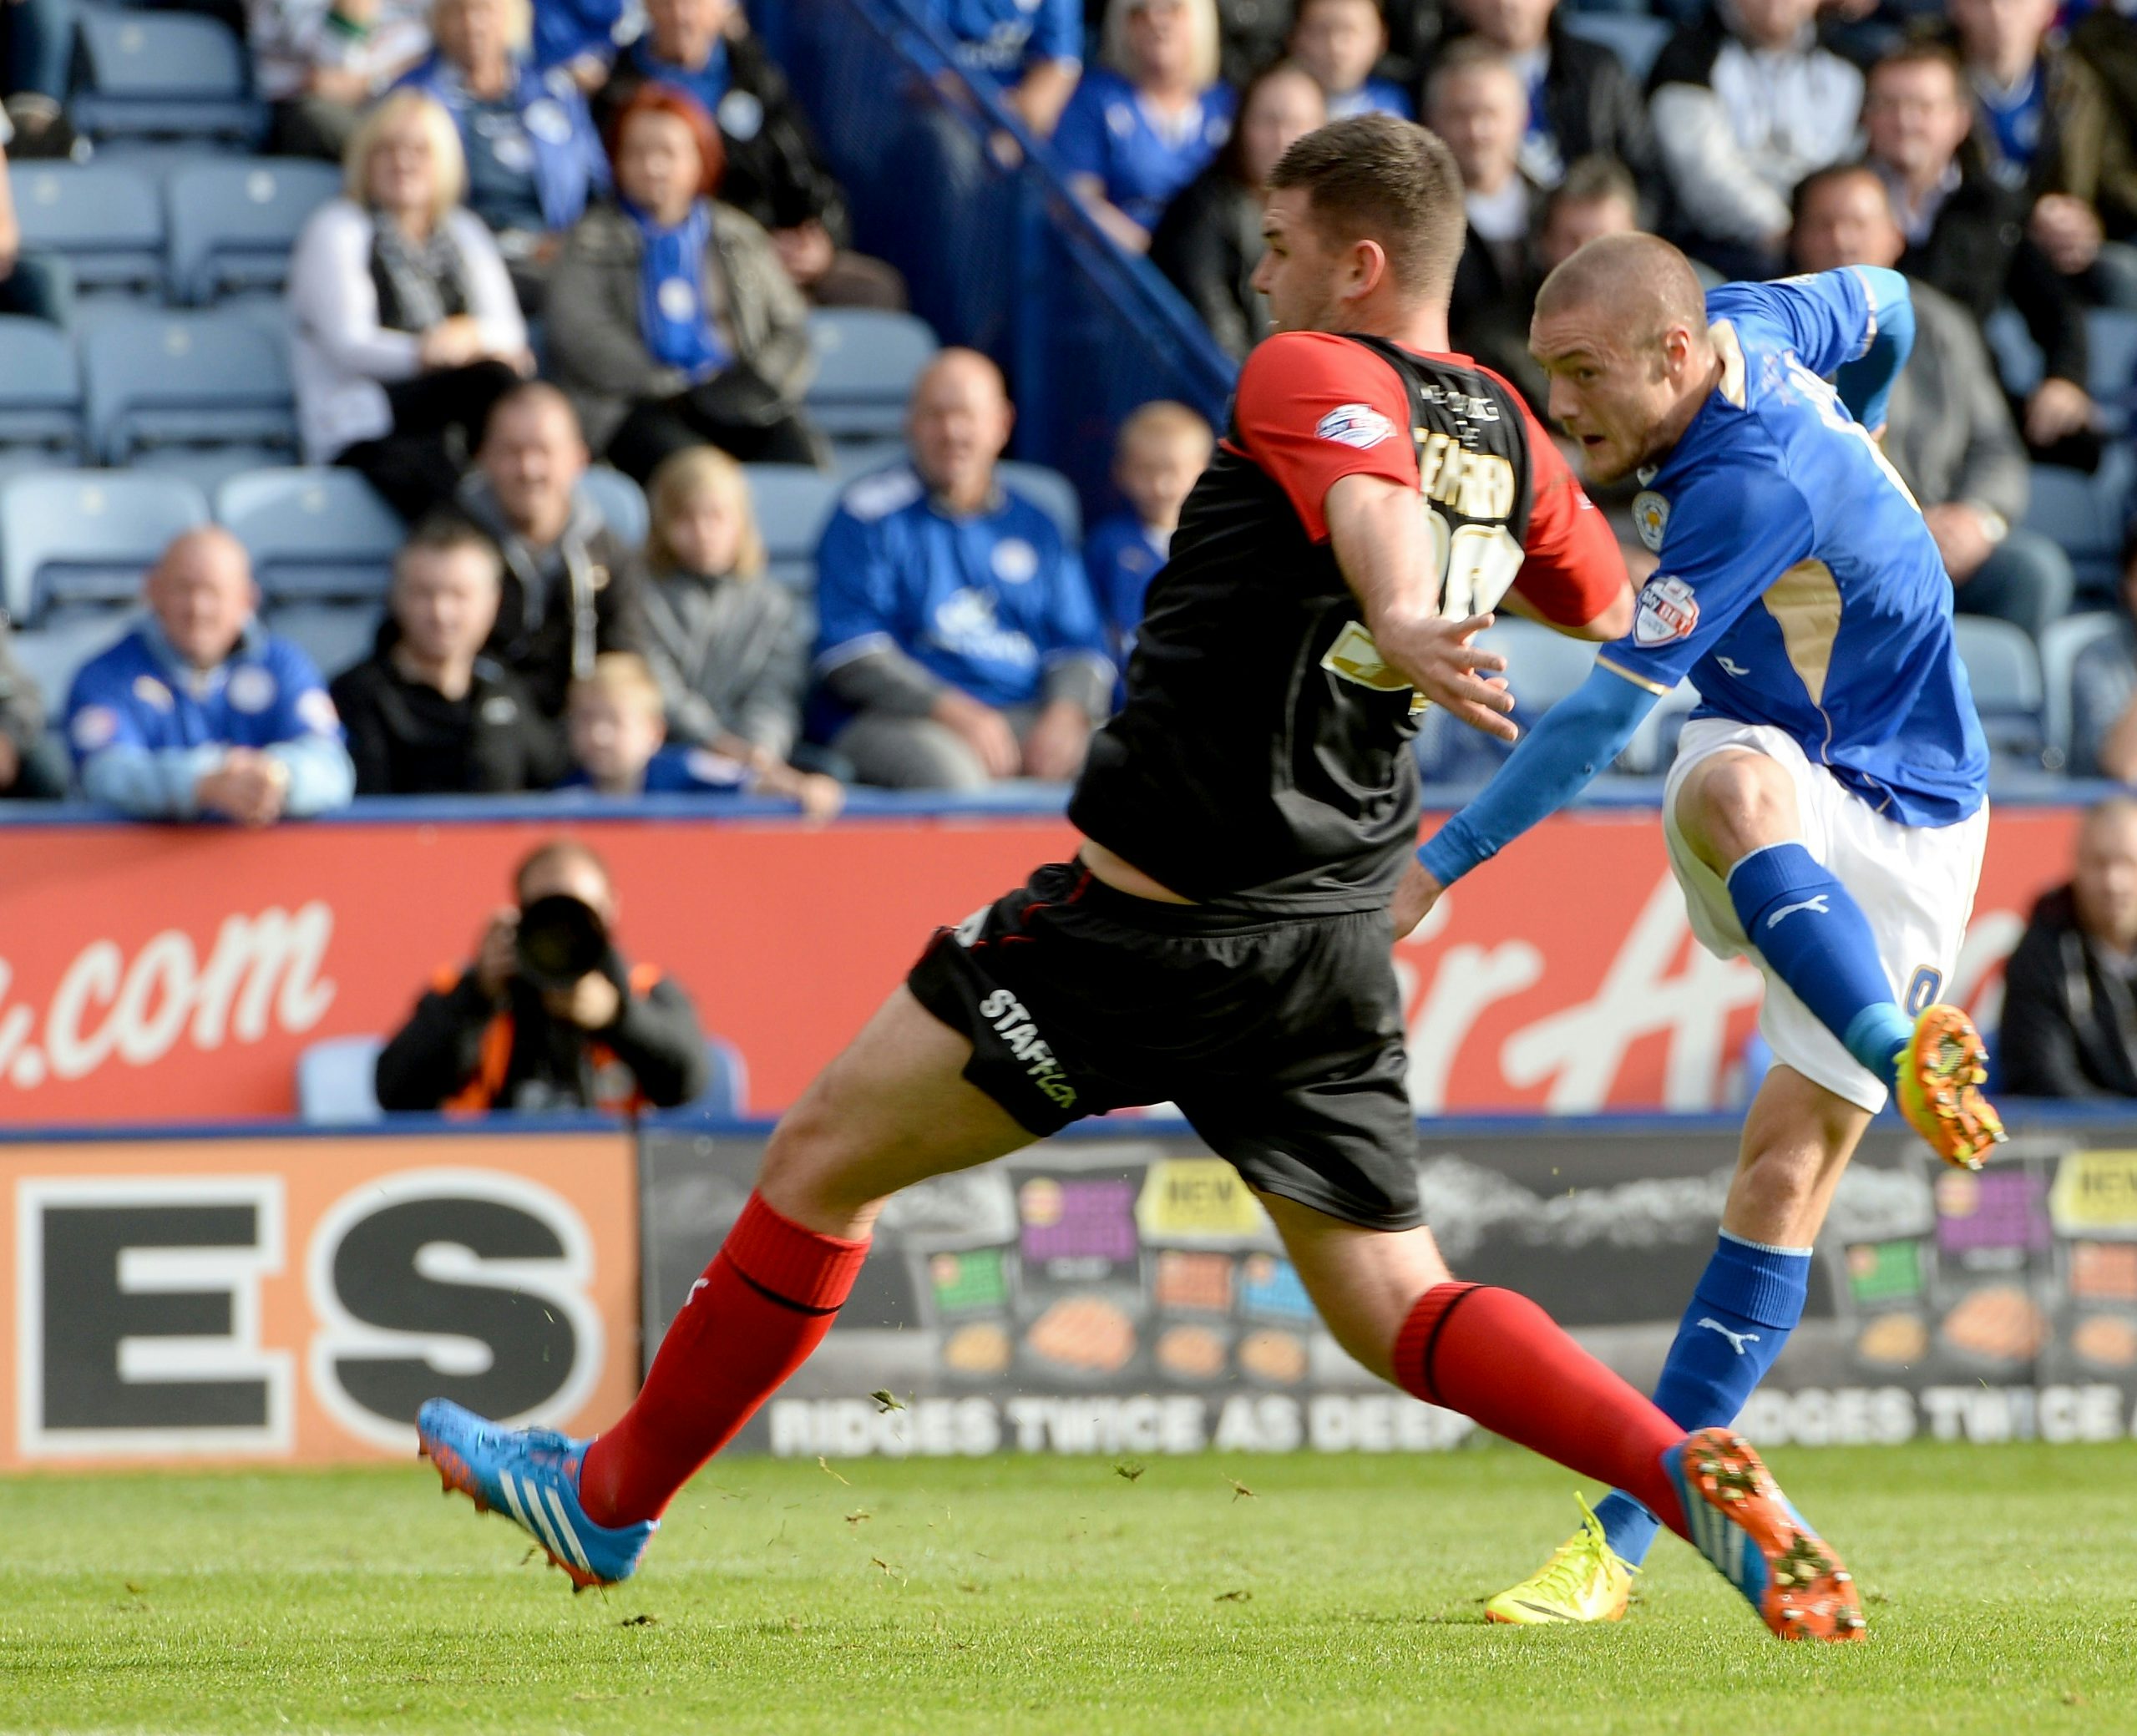 Jamie Vardy of Leicester scores the opening goal during the Sky Bet Championship match between Leicester City and Huddersfield Town on October 19, 2013